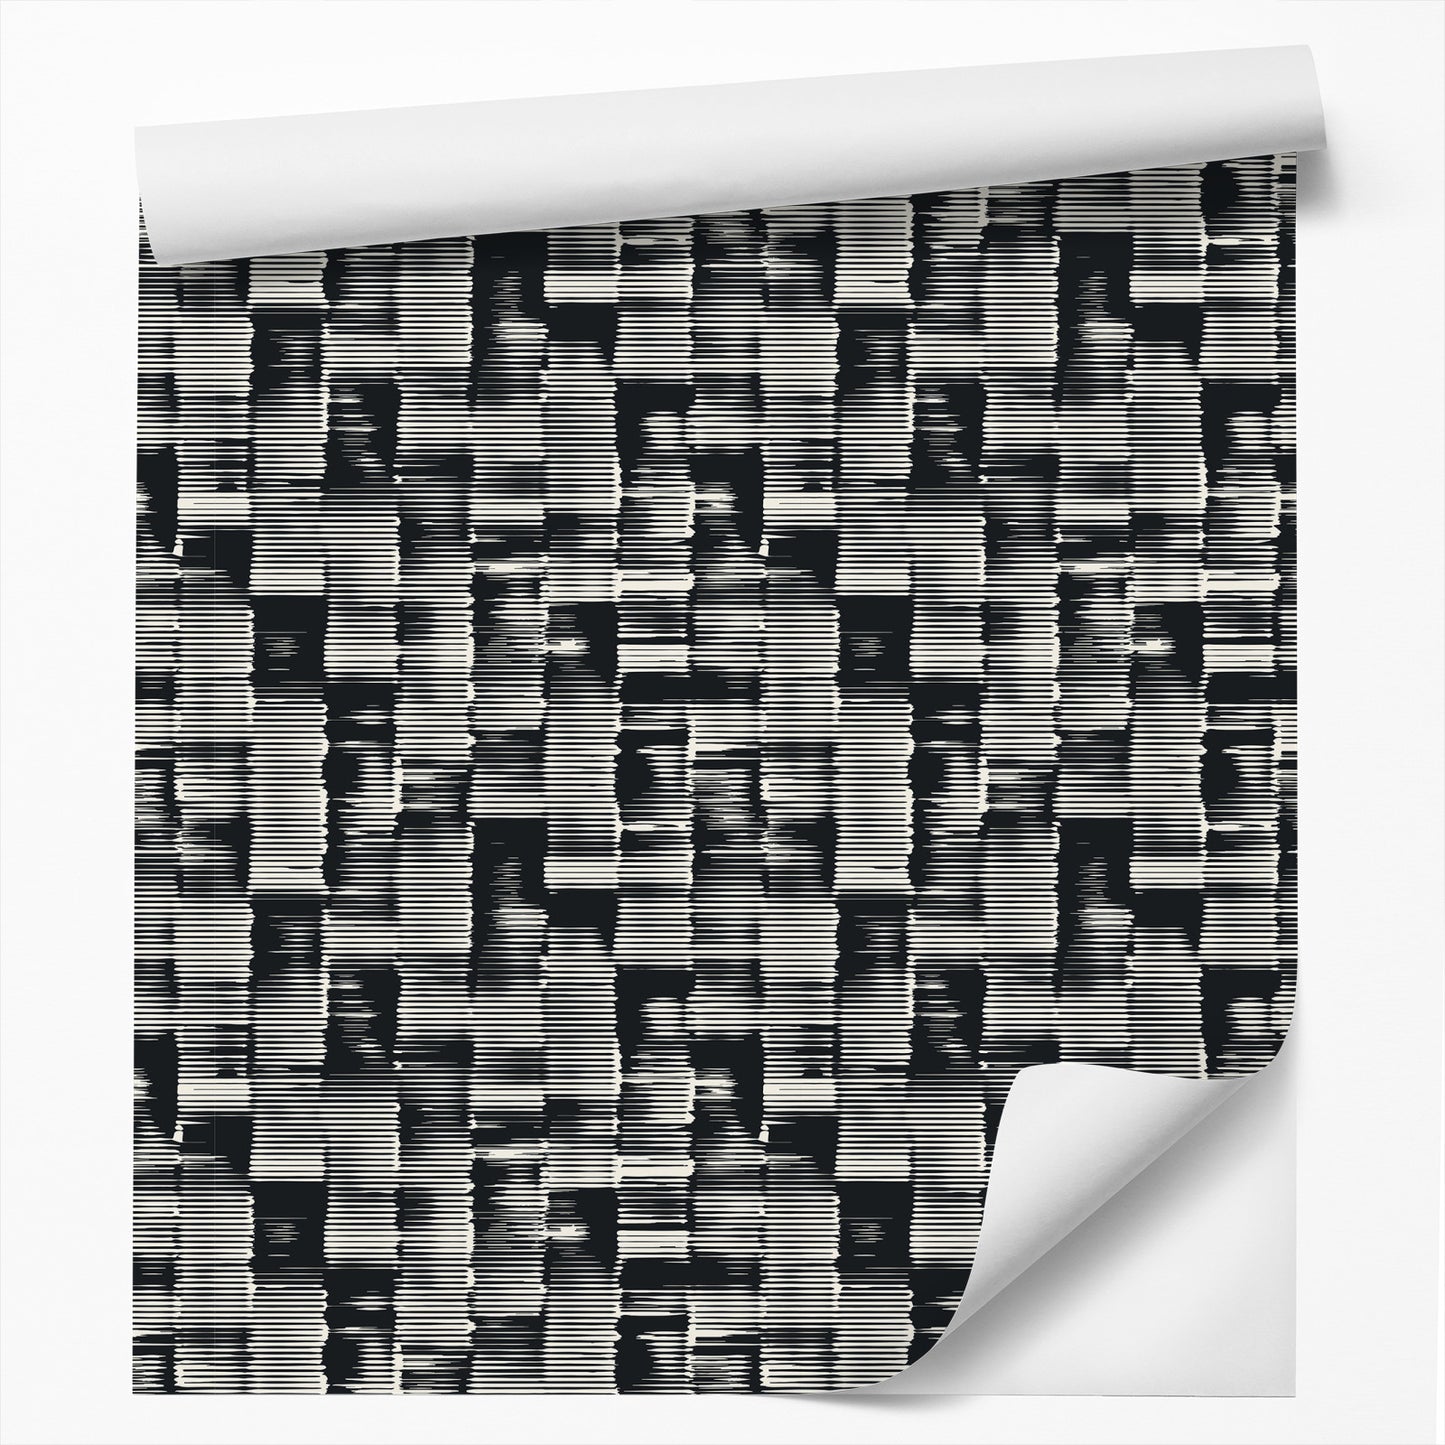 Peel & Stick Wallpaper Roll - Black & White Abstract Ink Pattern by DecoWorks